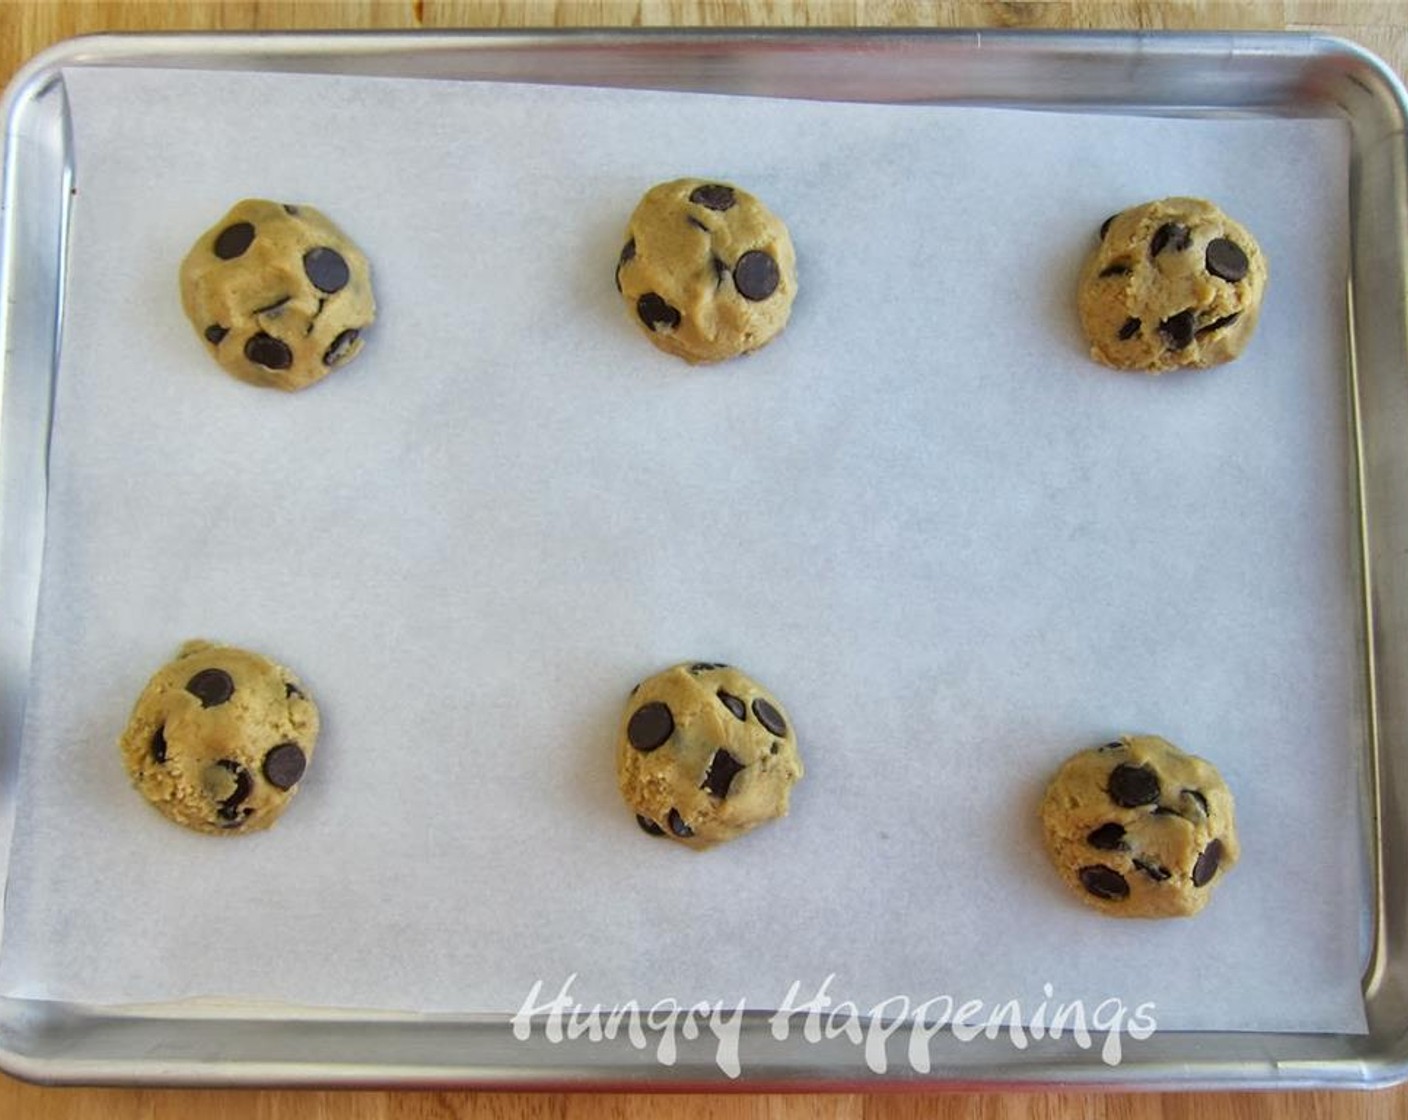 step 5 Fold 3/4 of the Semi-Sweet Chocolate Chips (1 1/2 cups) into the batter. Scoop out 18 cookies, about 1/4 cup of dough for each. Place cookies on a parchment paper-lined baking sheet with plenty of room to spread.